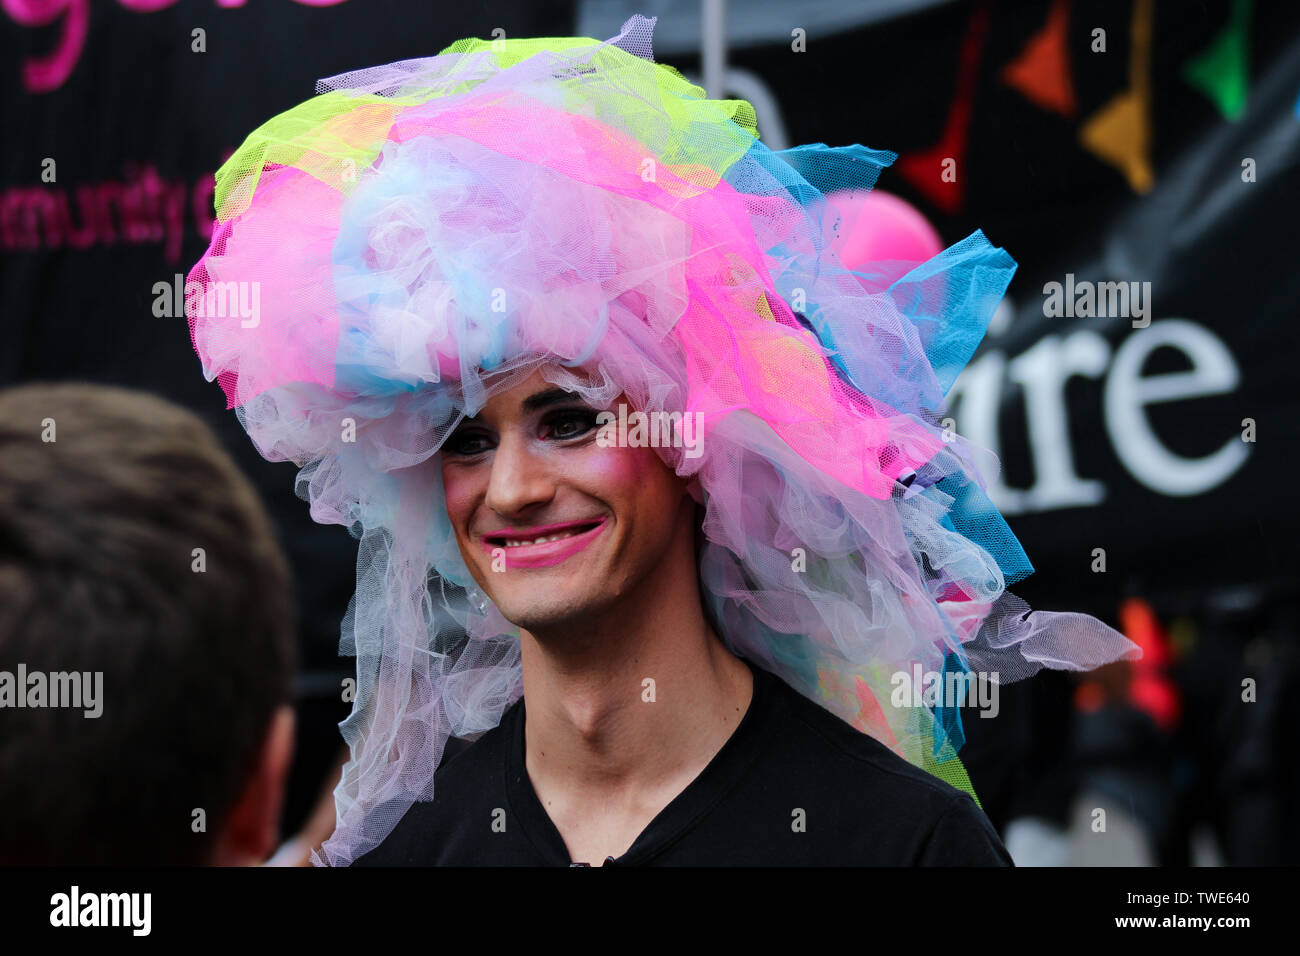 Pride in London Parade 2014 in London, England Stock Photo